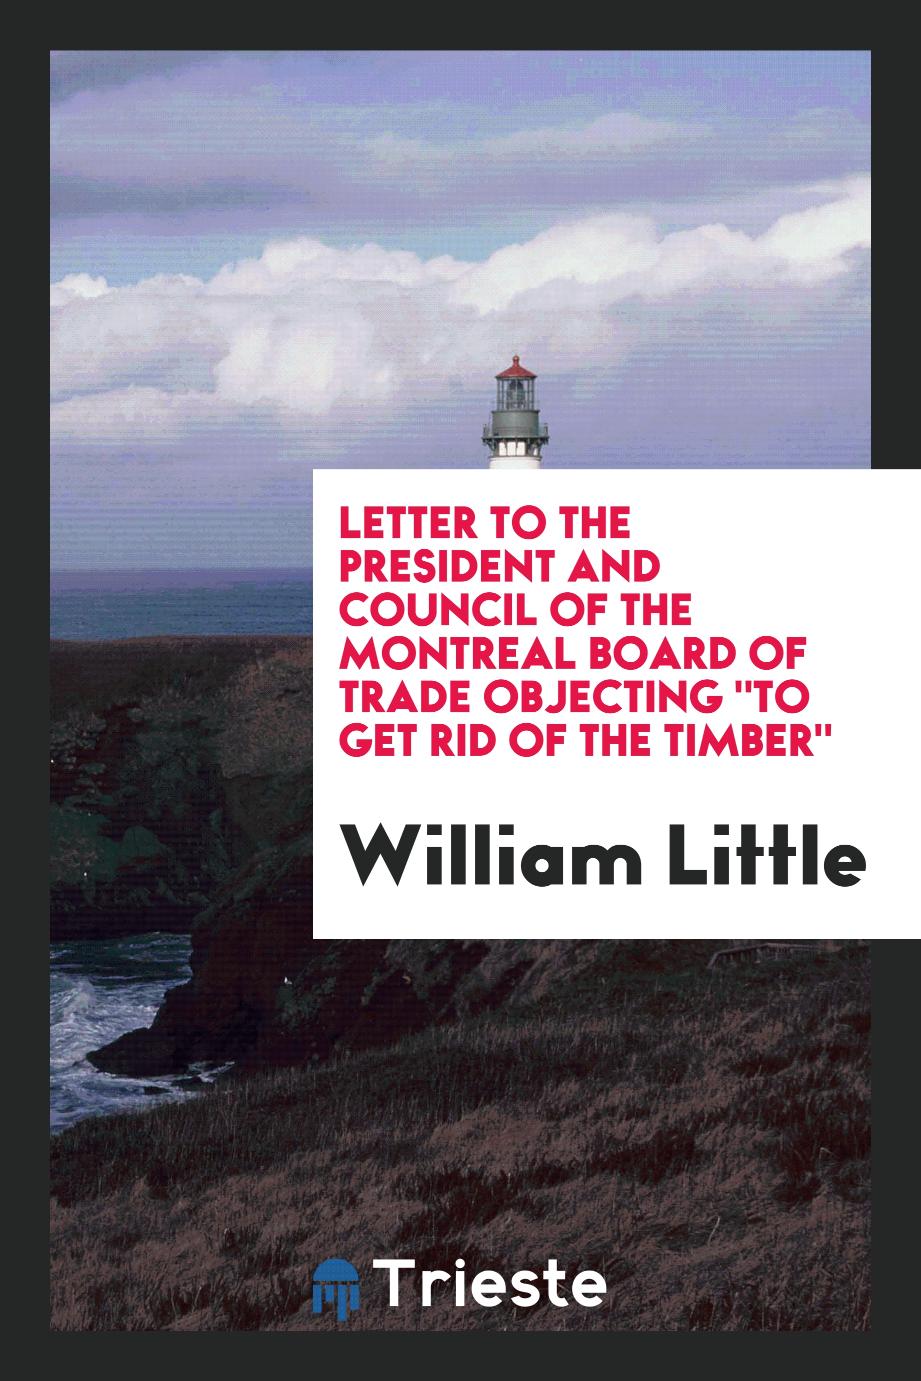 Letter to the President and Council of the Montreal Board of Trade Objecting "To get rid of the Timber"